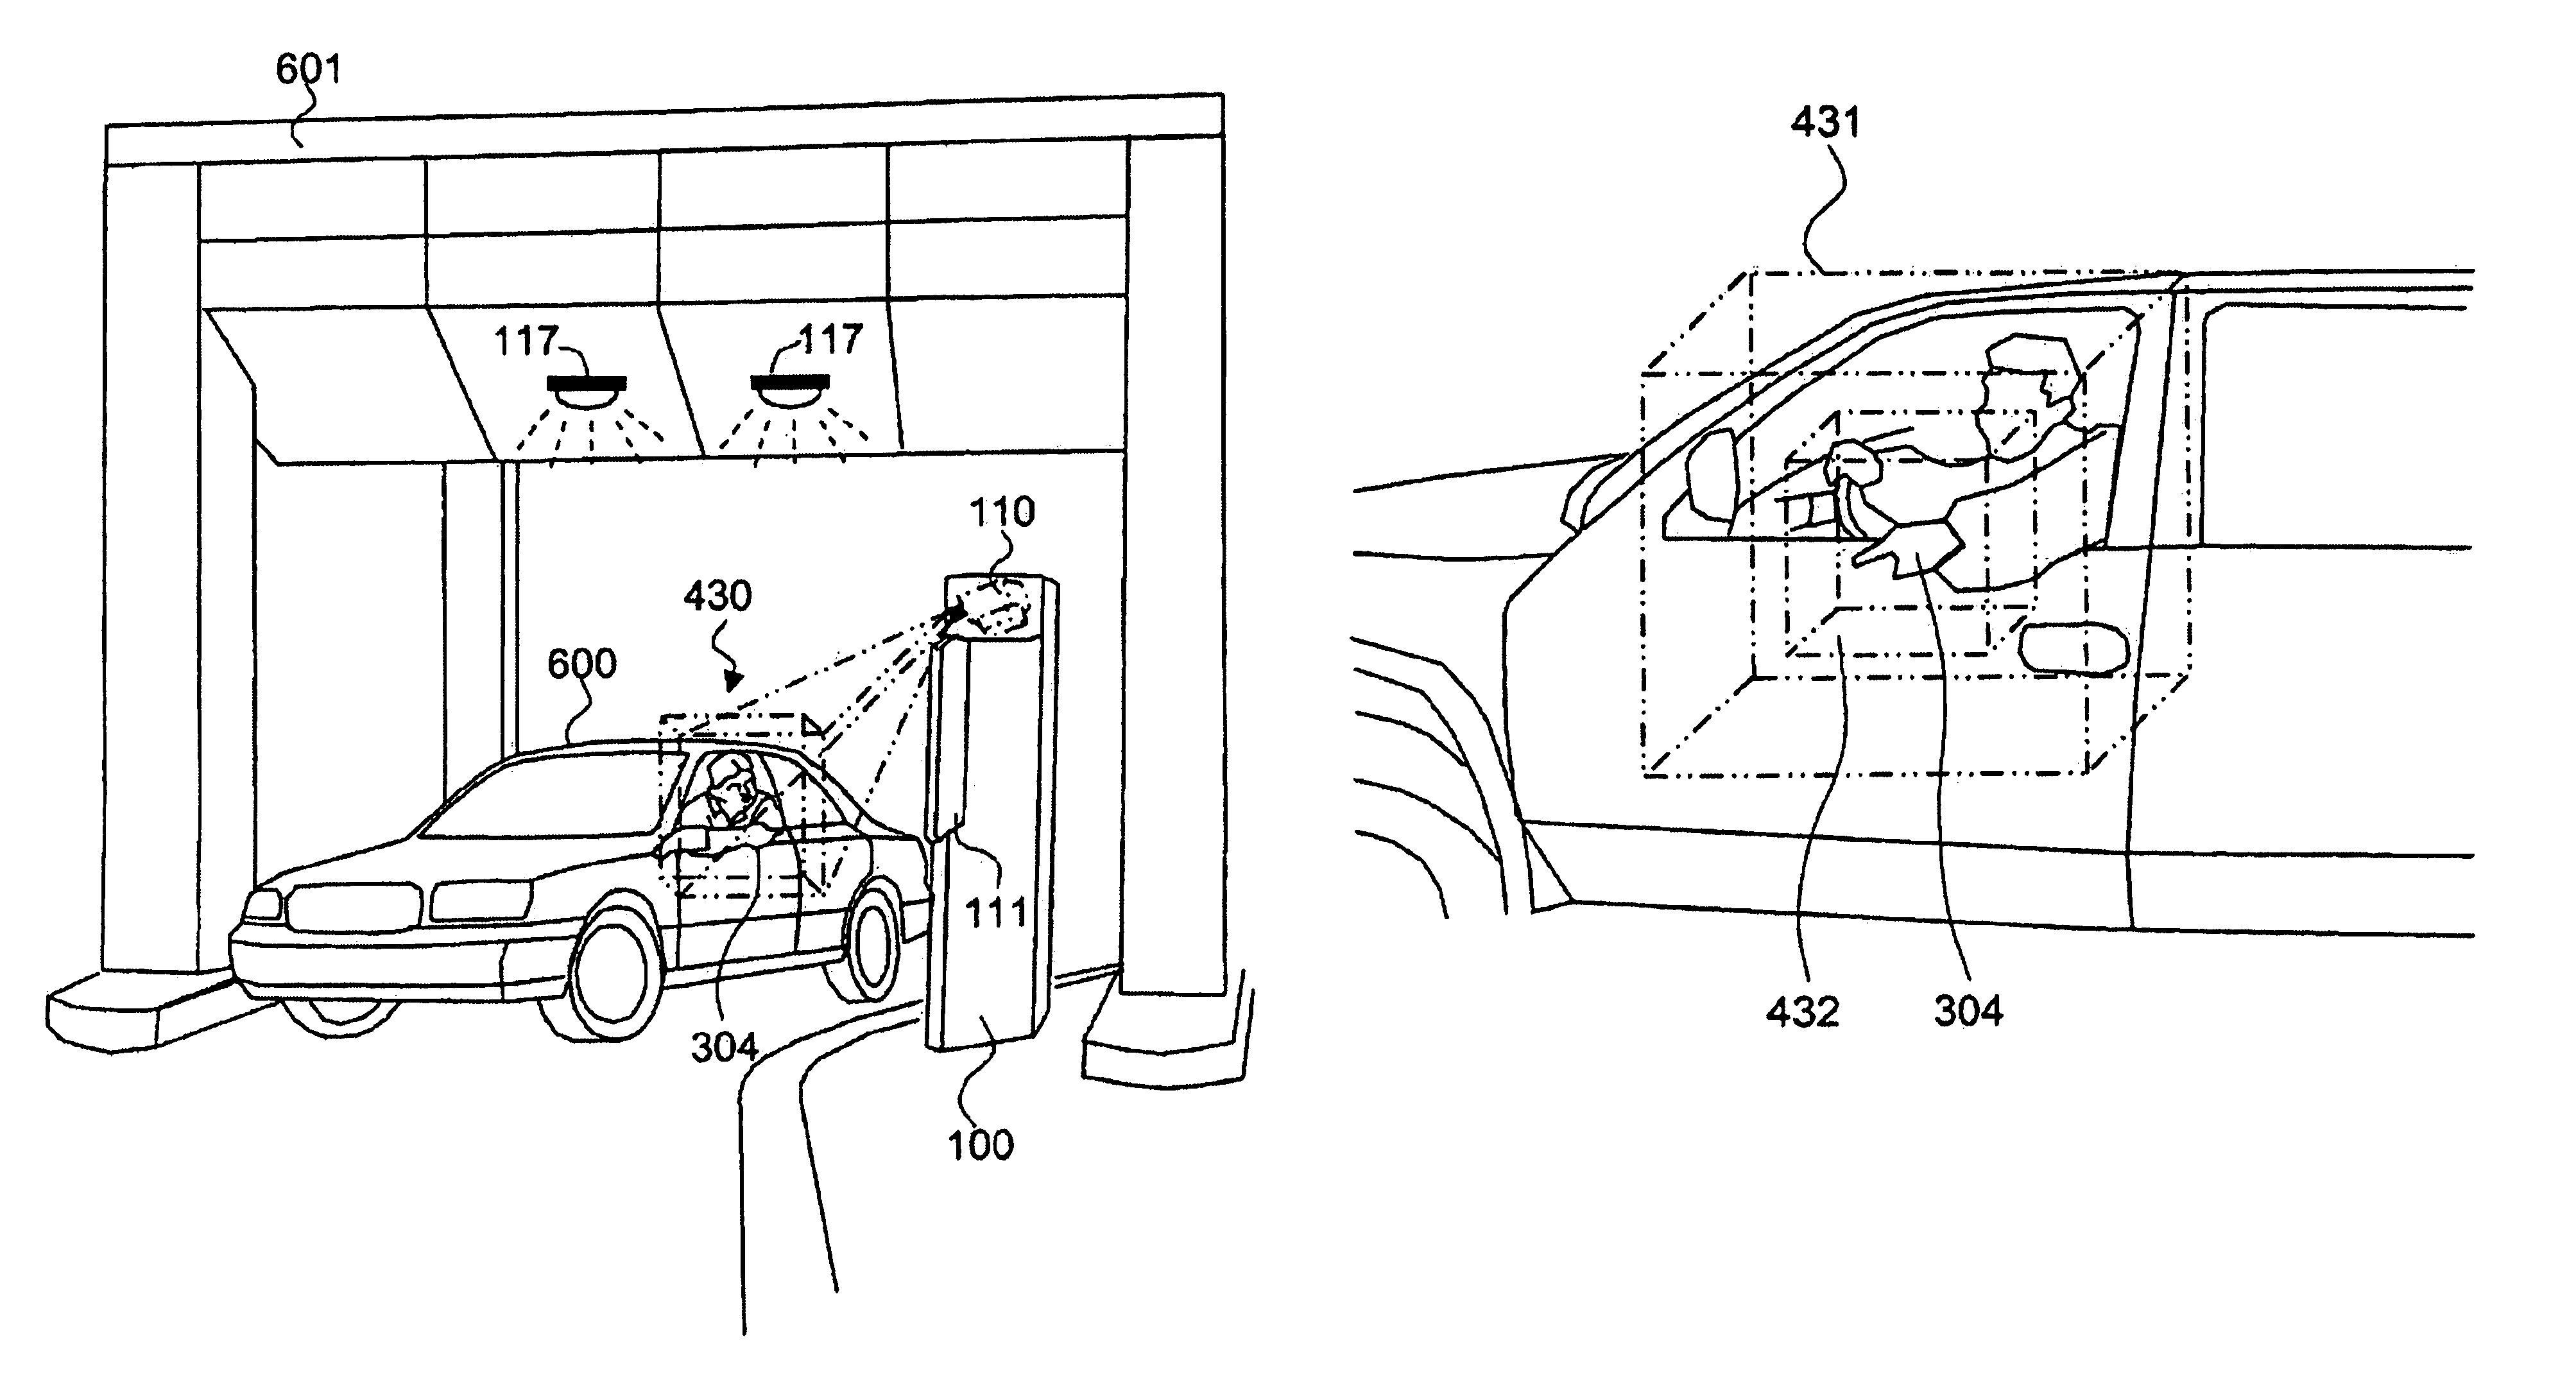 Method and apparatus for providing virtual touch interaction in the drive-thru